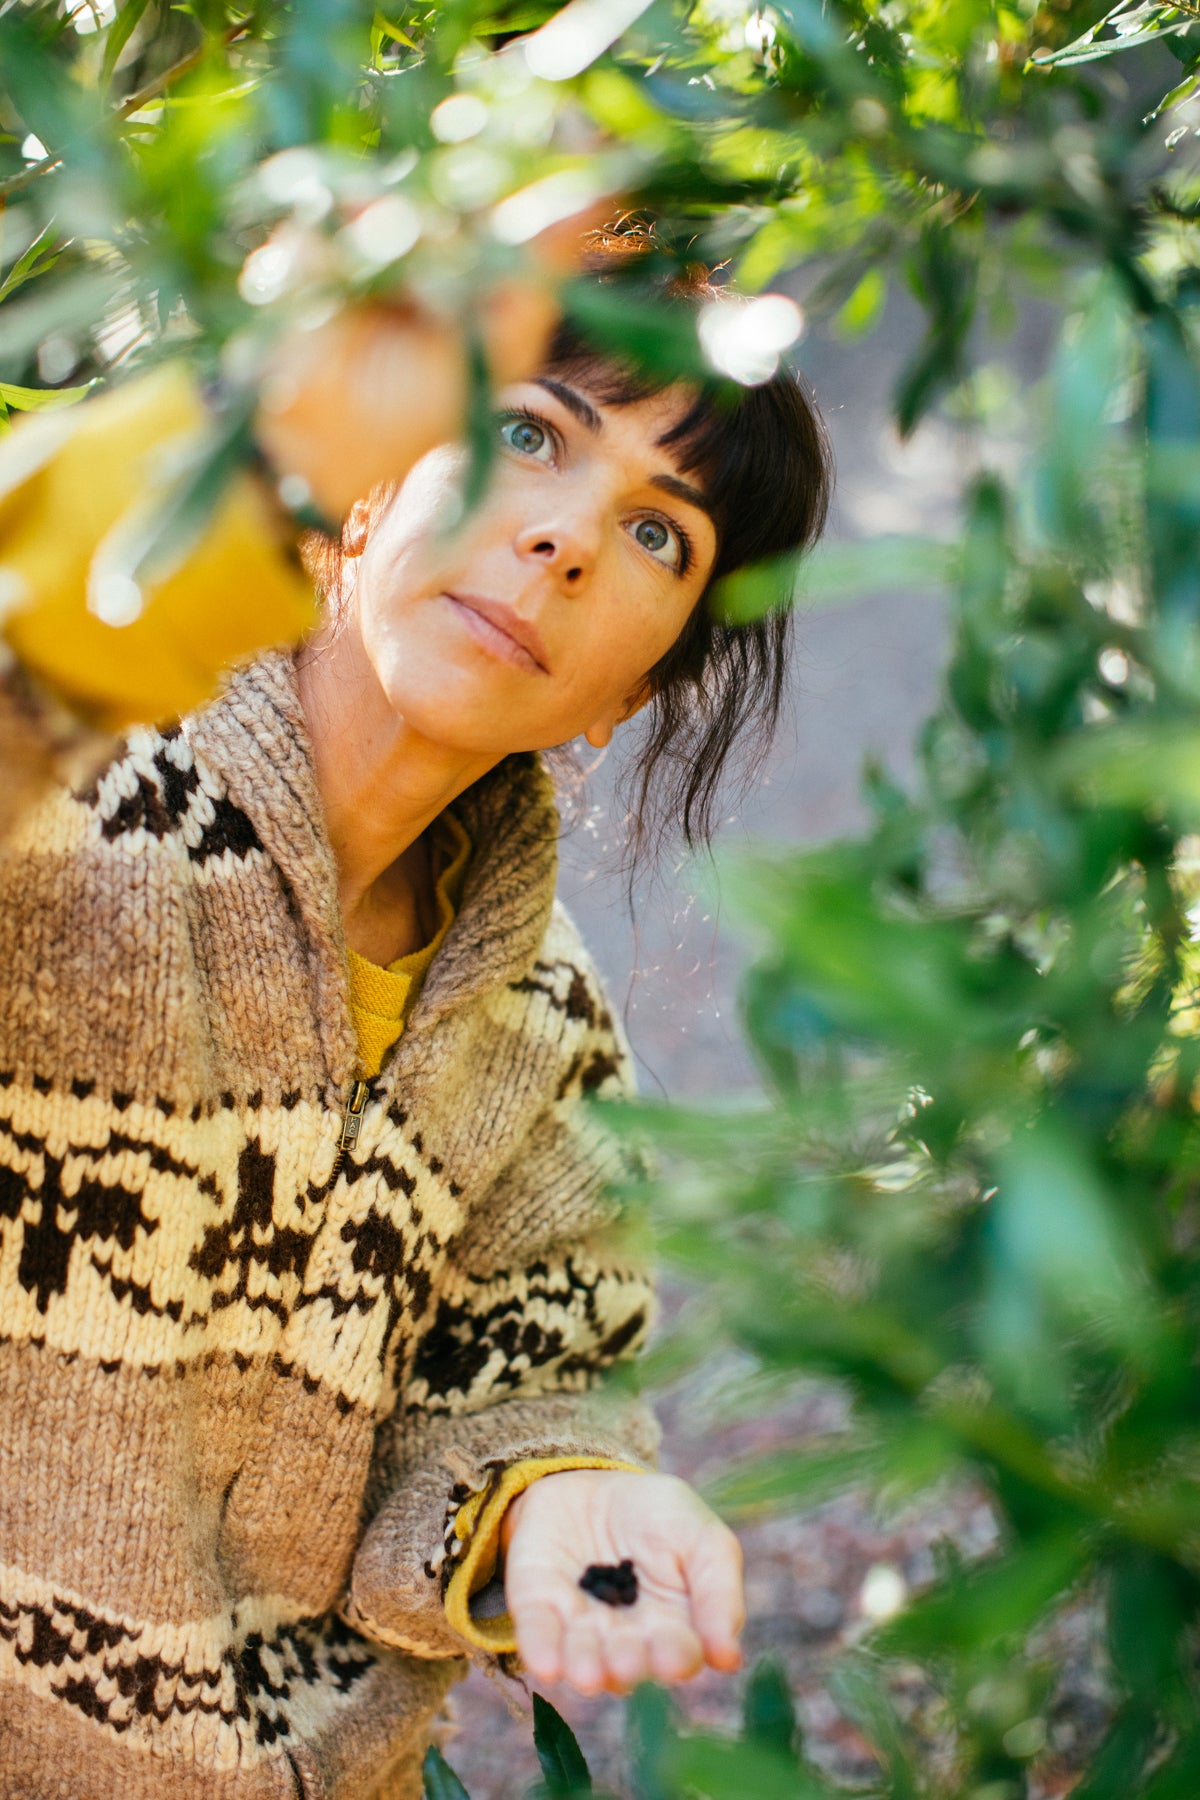 Angela L'Heureux in a brown patterned sweater hand picks ingredients off of a tree for her body care products.